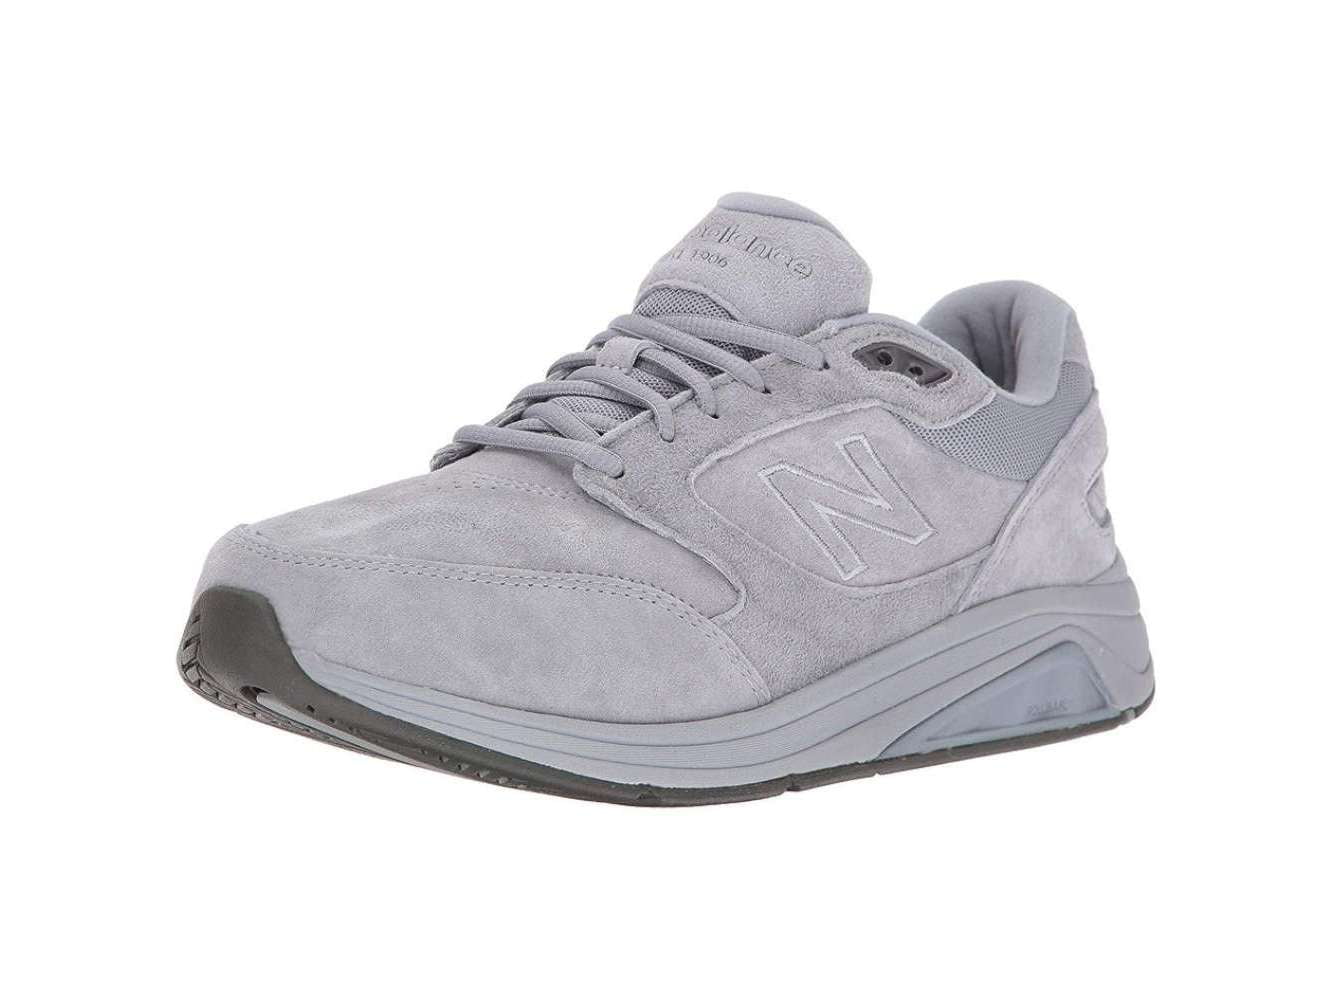 New Balance - New Balance Mens 928v2 Walking Shoe Leather Low Top Lace